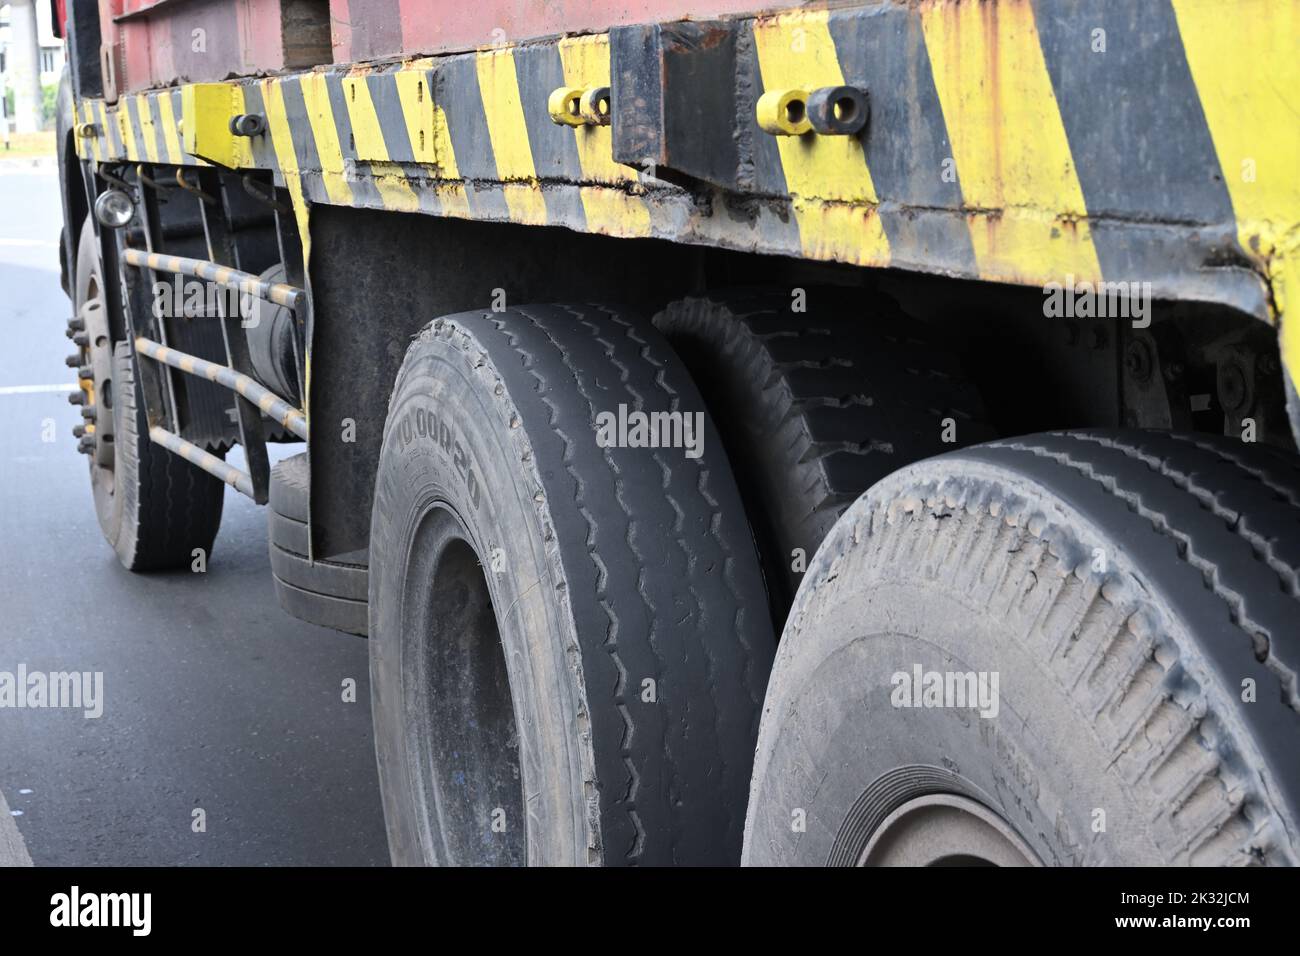 Colombo, Sri Lanka - August 05, 2022: Side View of tires of a Container truck or lorry on the road, center tire in focus Stock Photo